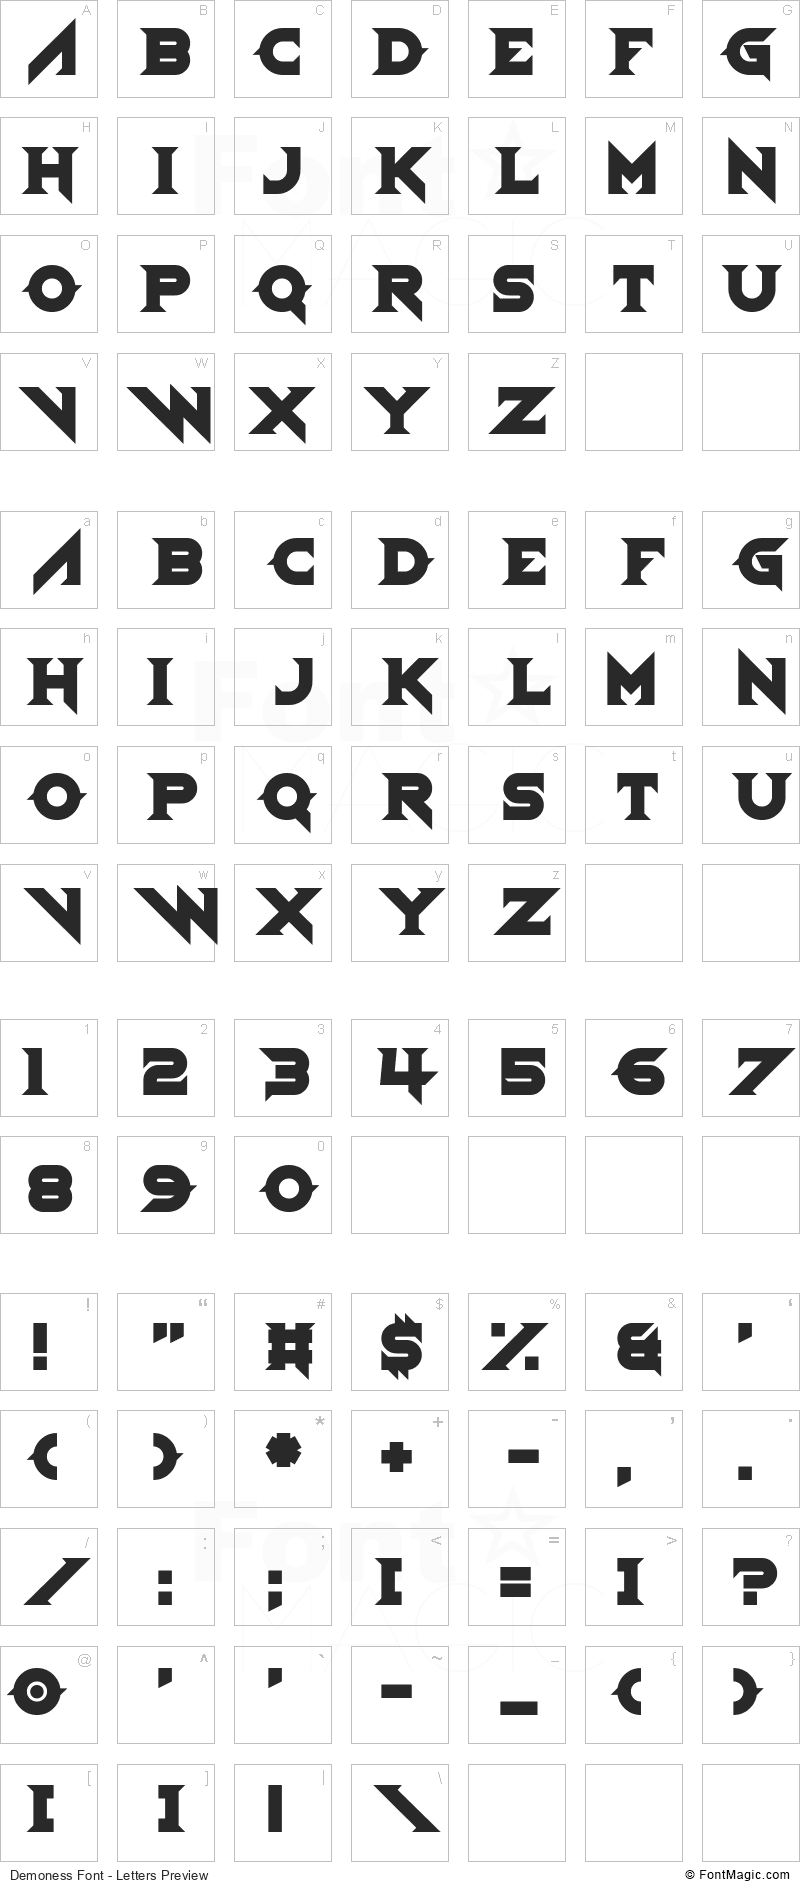 Demoness Font - All Latters Preview Chart